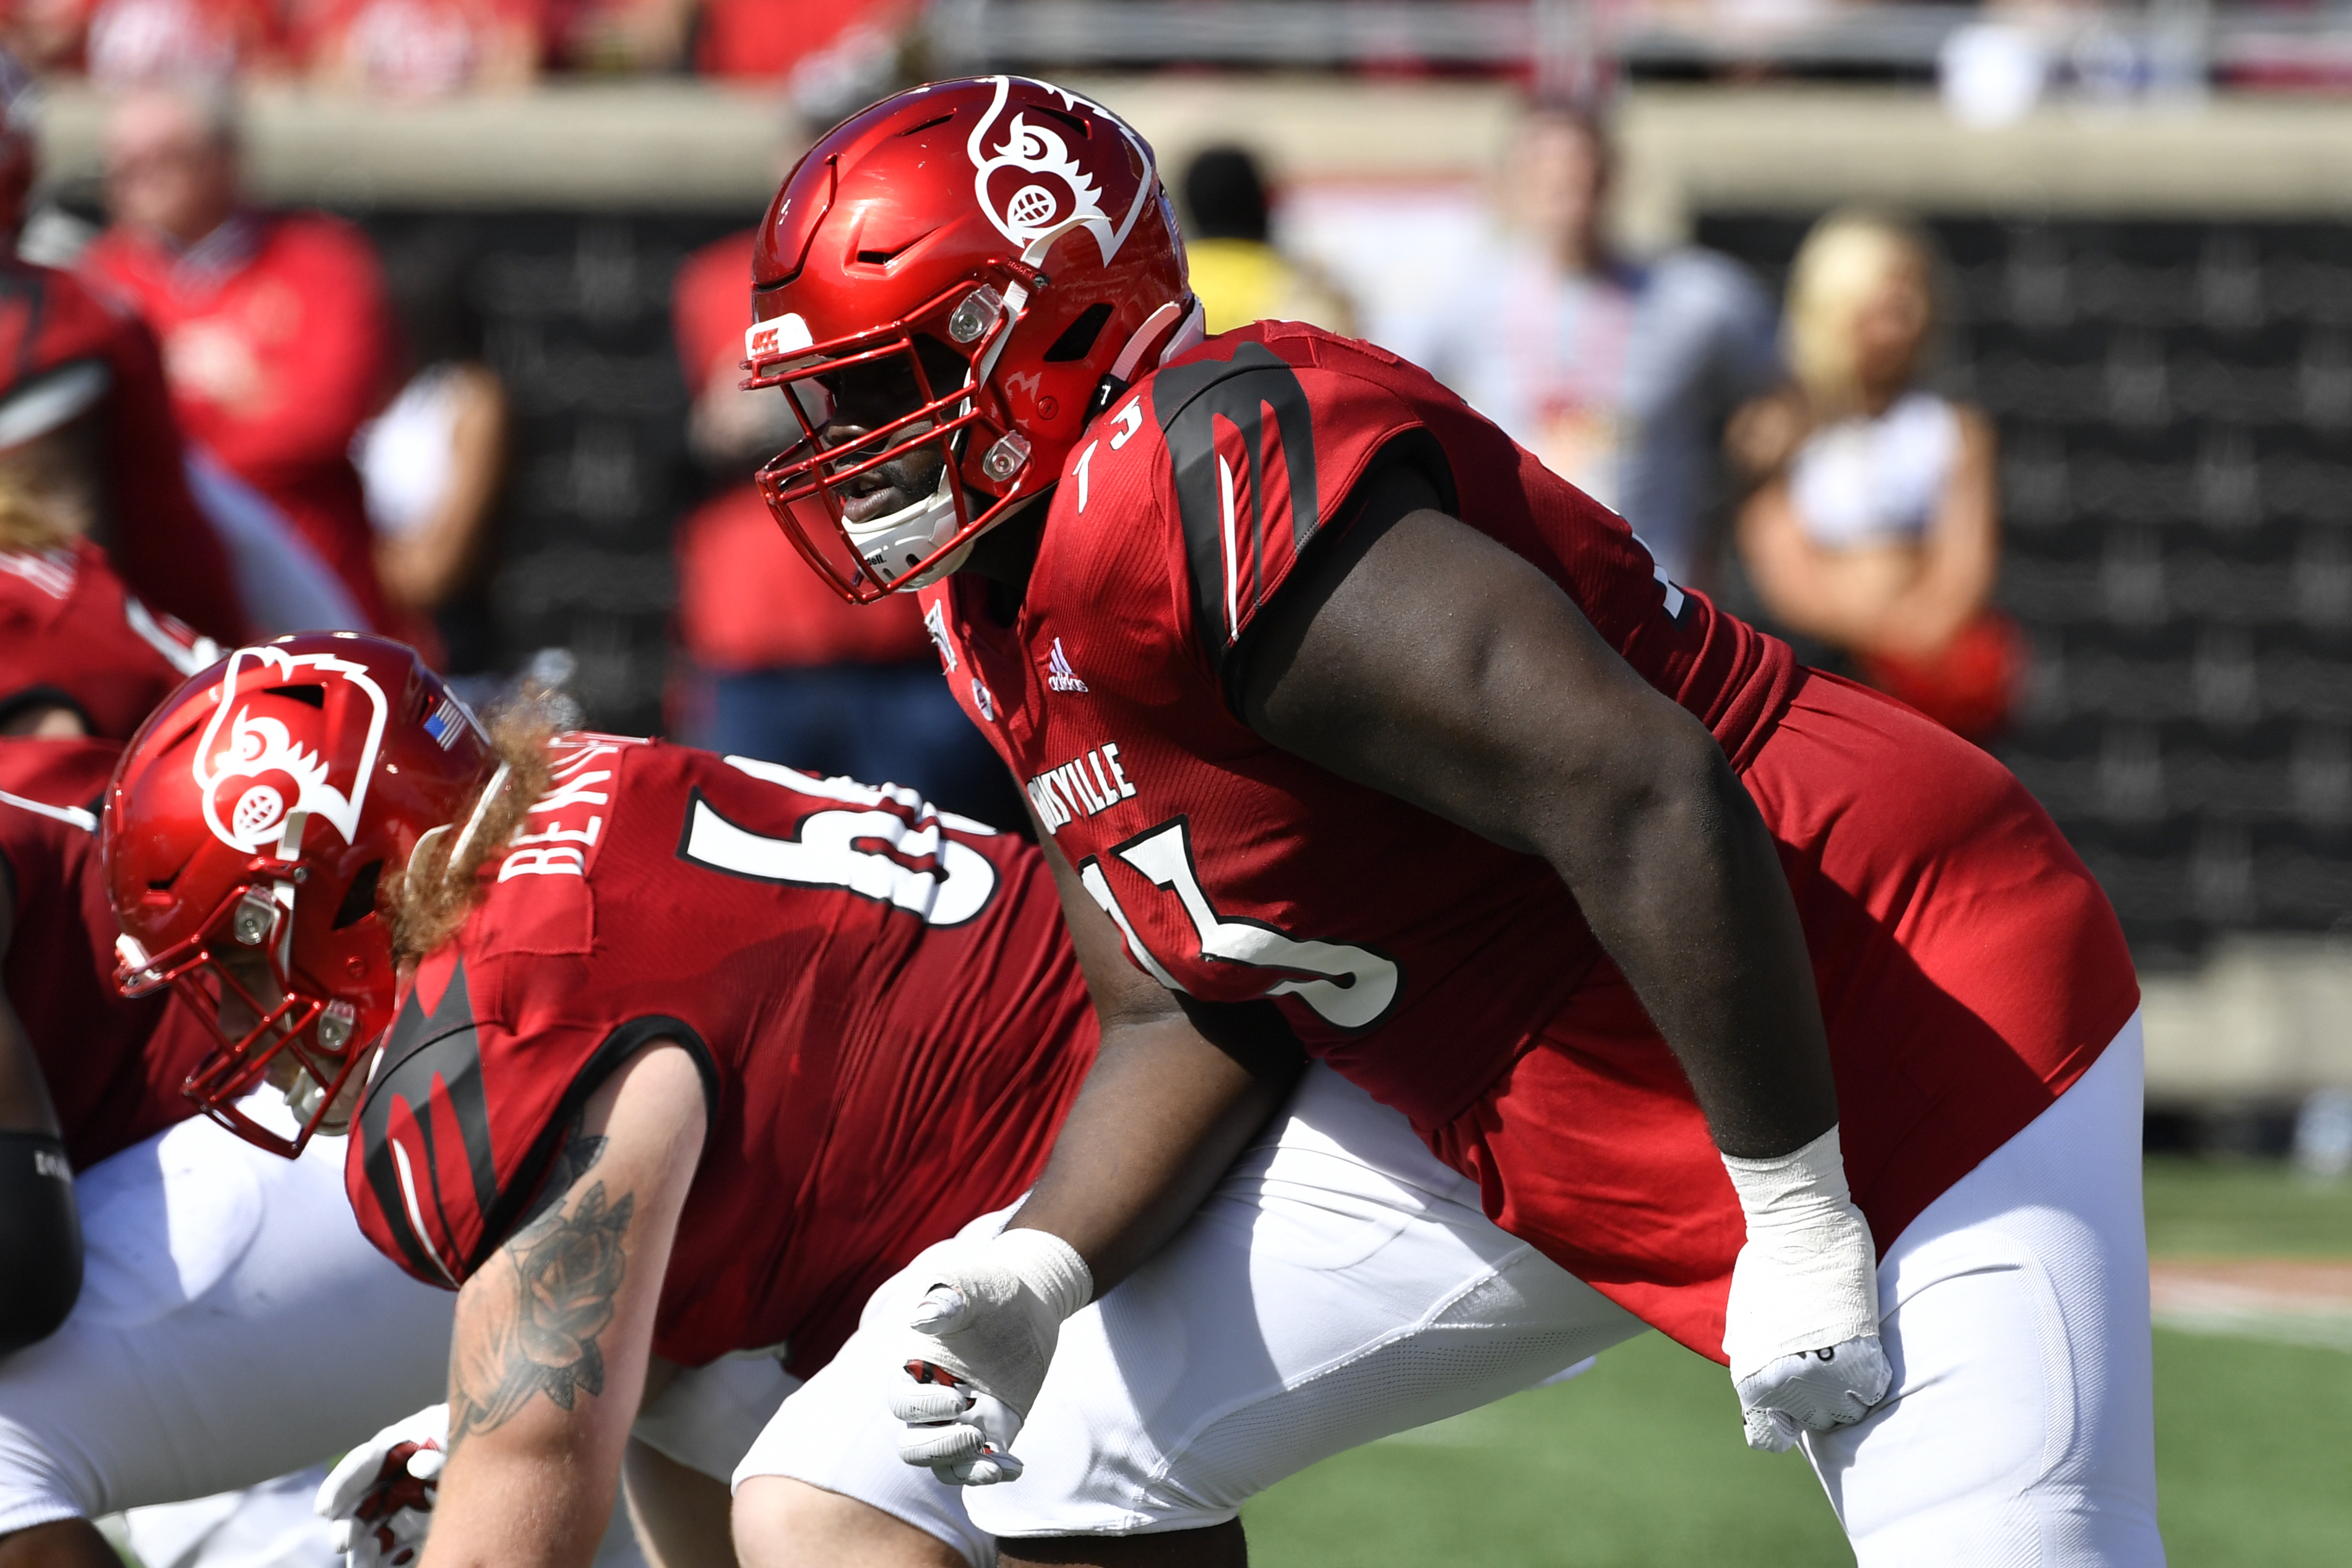 NFL Draft 2020: Jets not worried about Mekhi Becton red flags after 'unbelievable deep dive,' including 1-on-1 chat with GM - nj.com